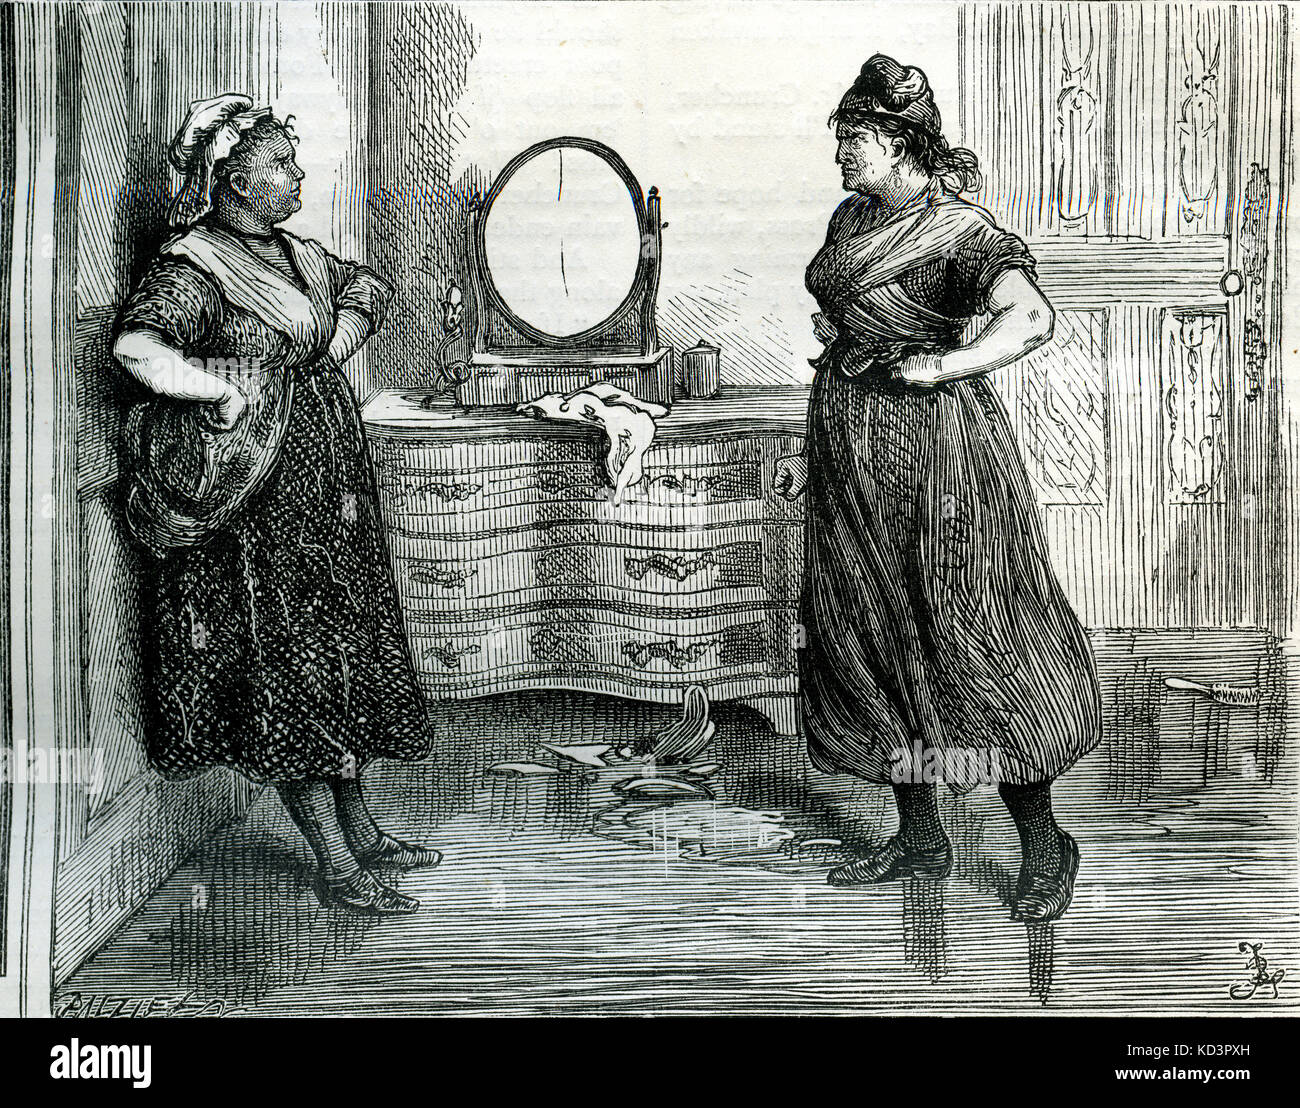 A Tale of Two Cities. Confrontation between Madame Defarge and Miss Pross, book 3 chapter 14. Caption reads: 'You might, from your appearance, be the wife of Lucifer' said miss Pross in her breathing. 'Nevertheless, you shall not get the better of me. I am an Englishwoman.' Novel by Charles Dickens, English novelist, 7 February 1812 - 9 June 1870. Illustration by Frederick (Fred) Barnard. London. Chapman and Hall. Stock Photo